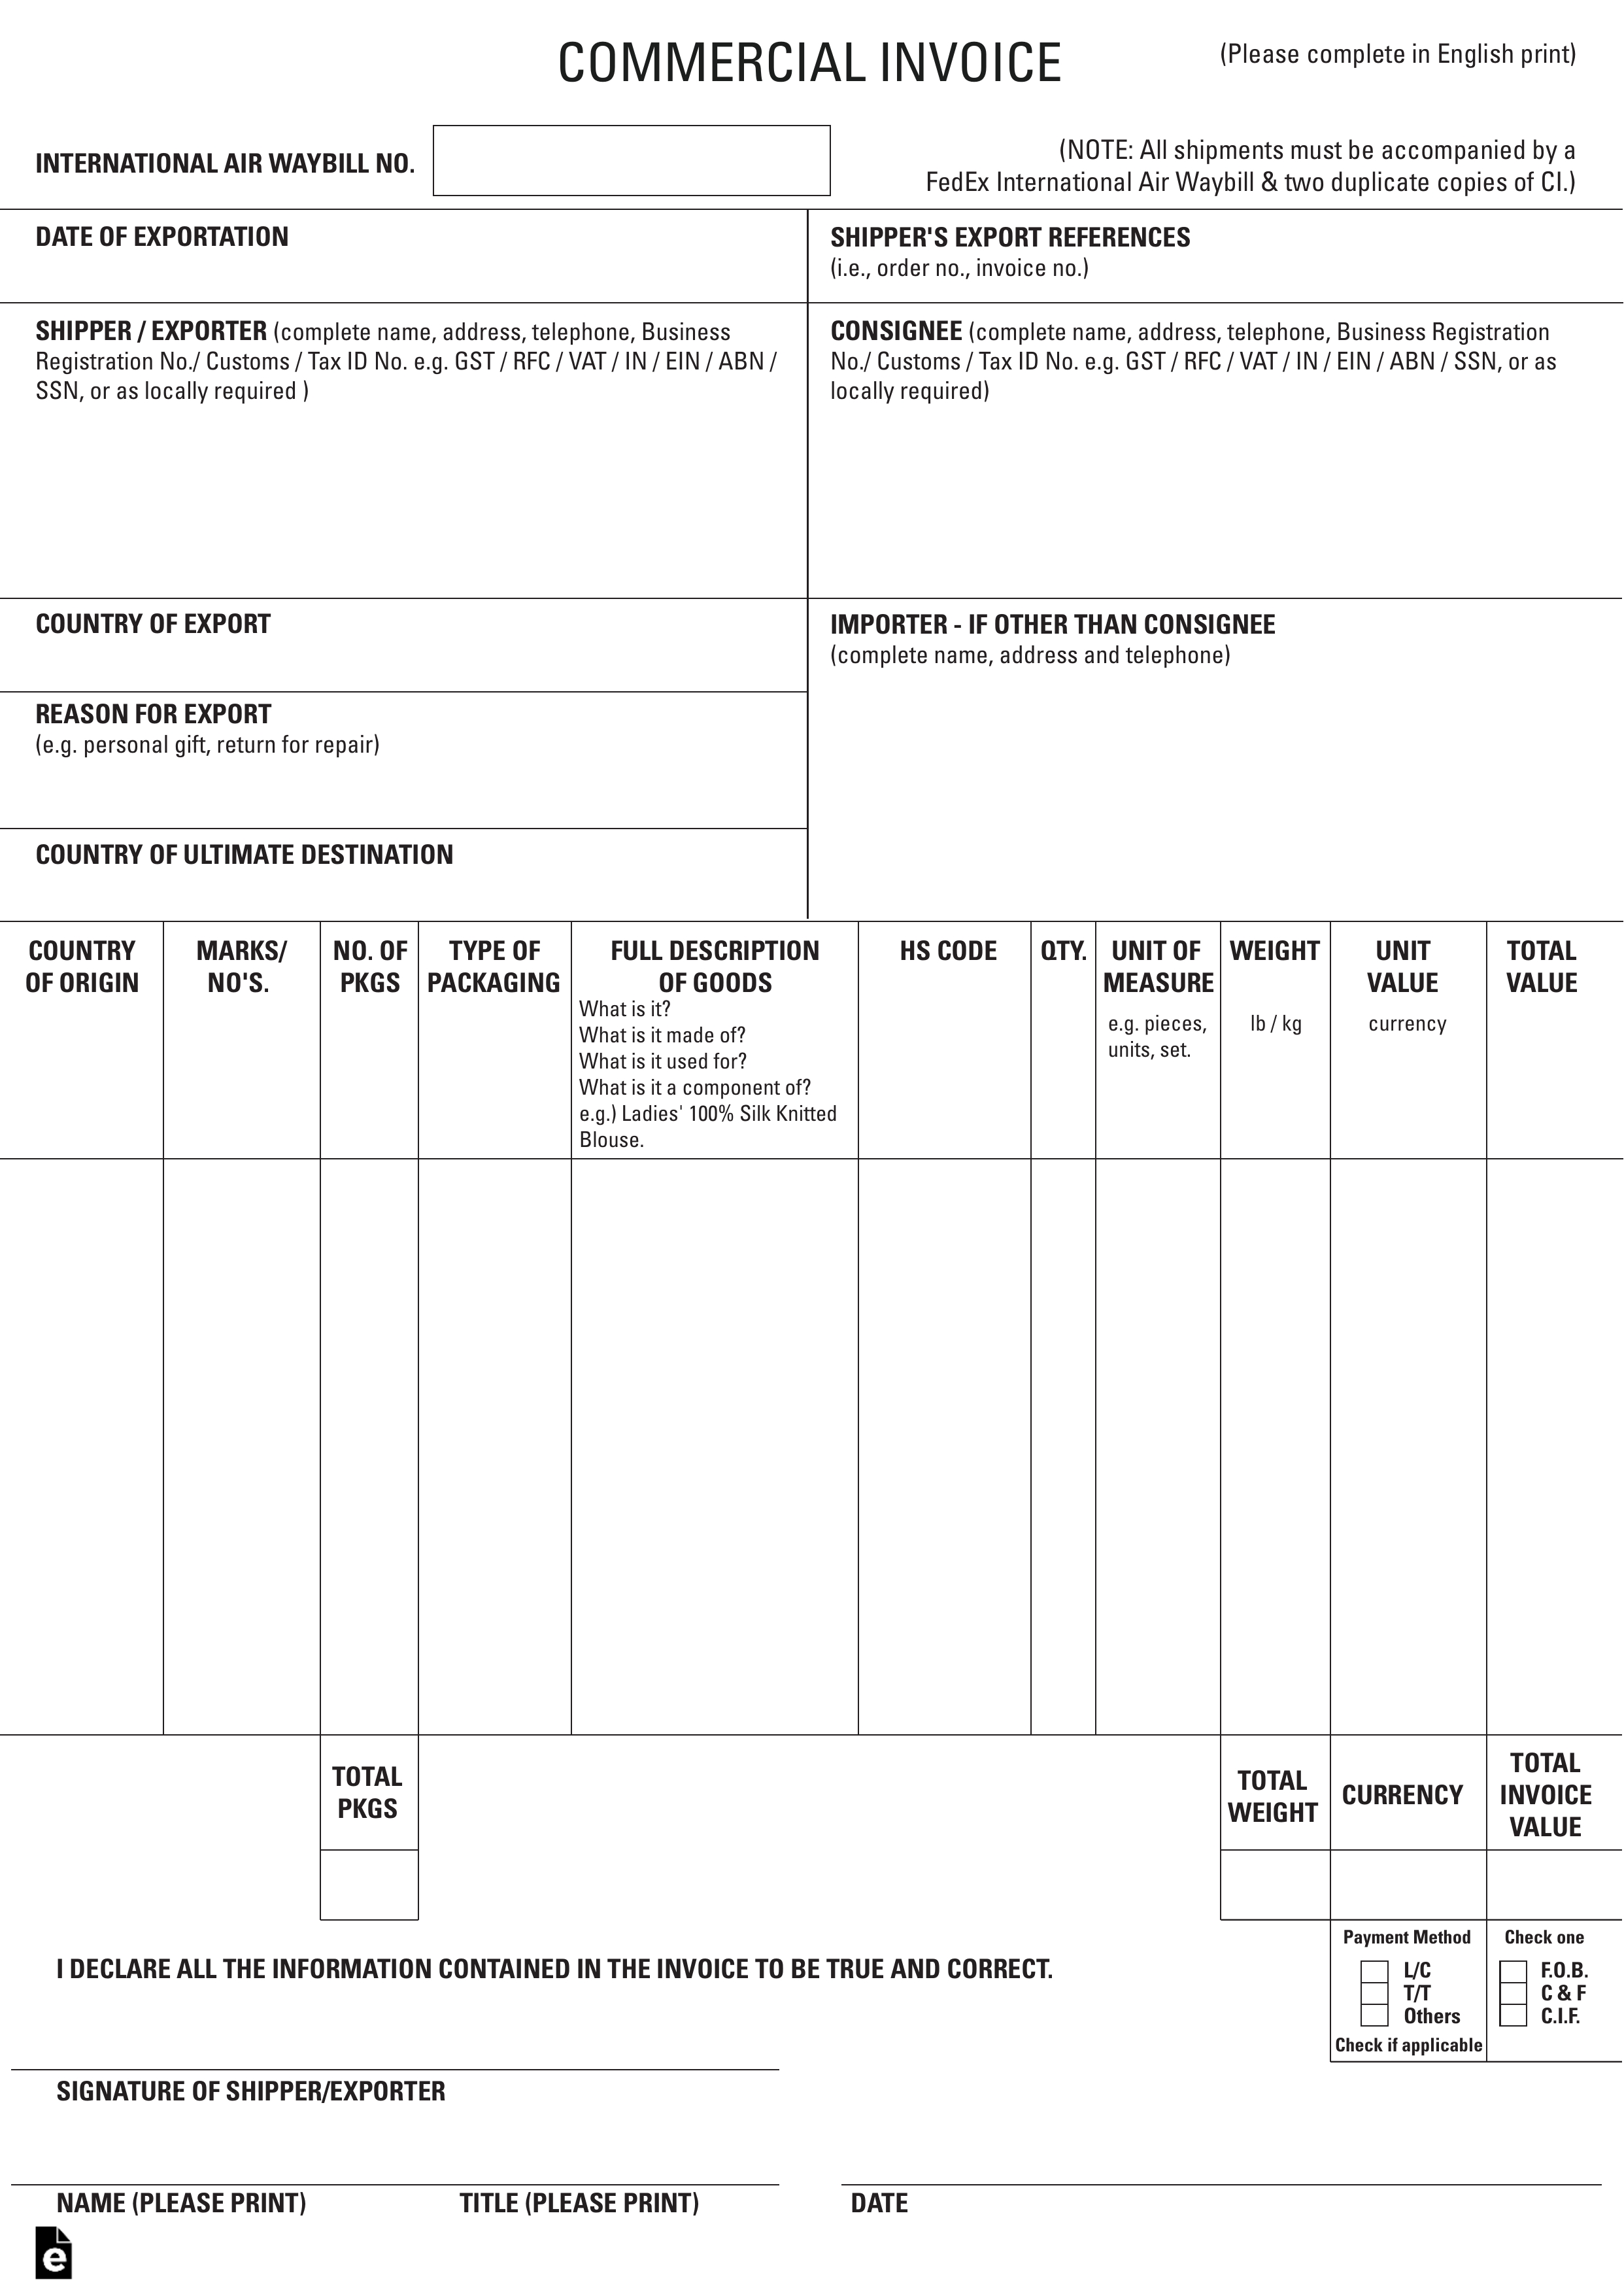 free international commercial invoice templates pdf commercial invoice template fillable